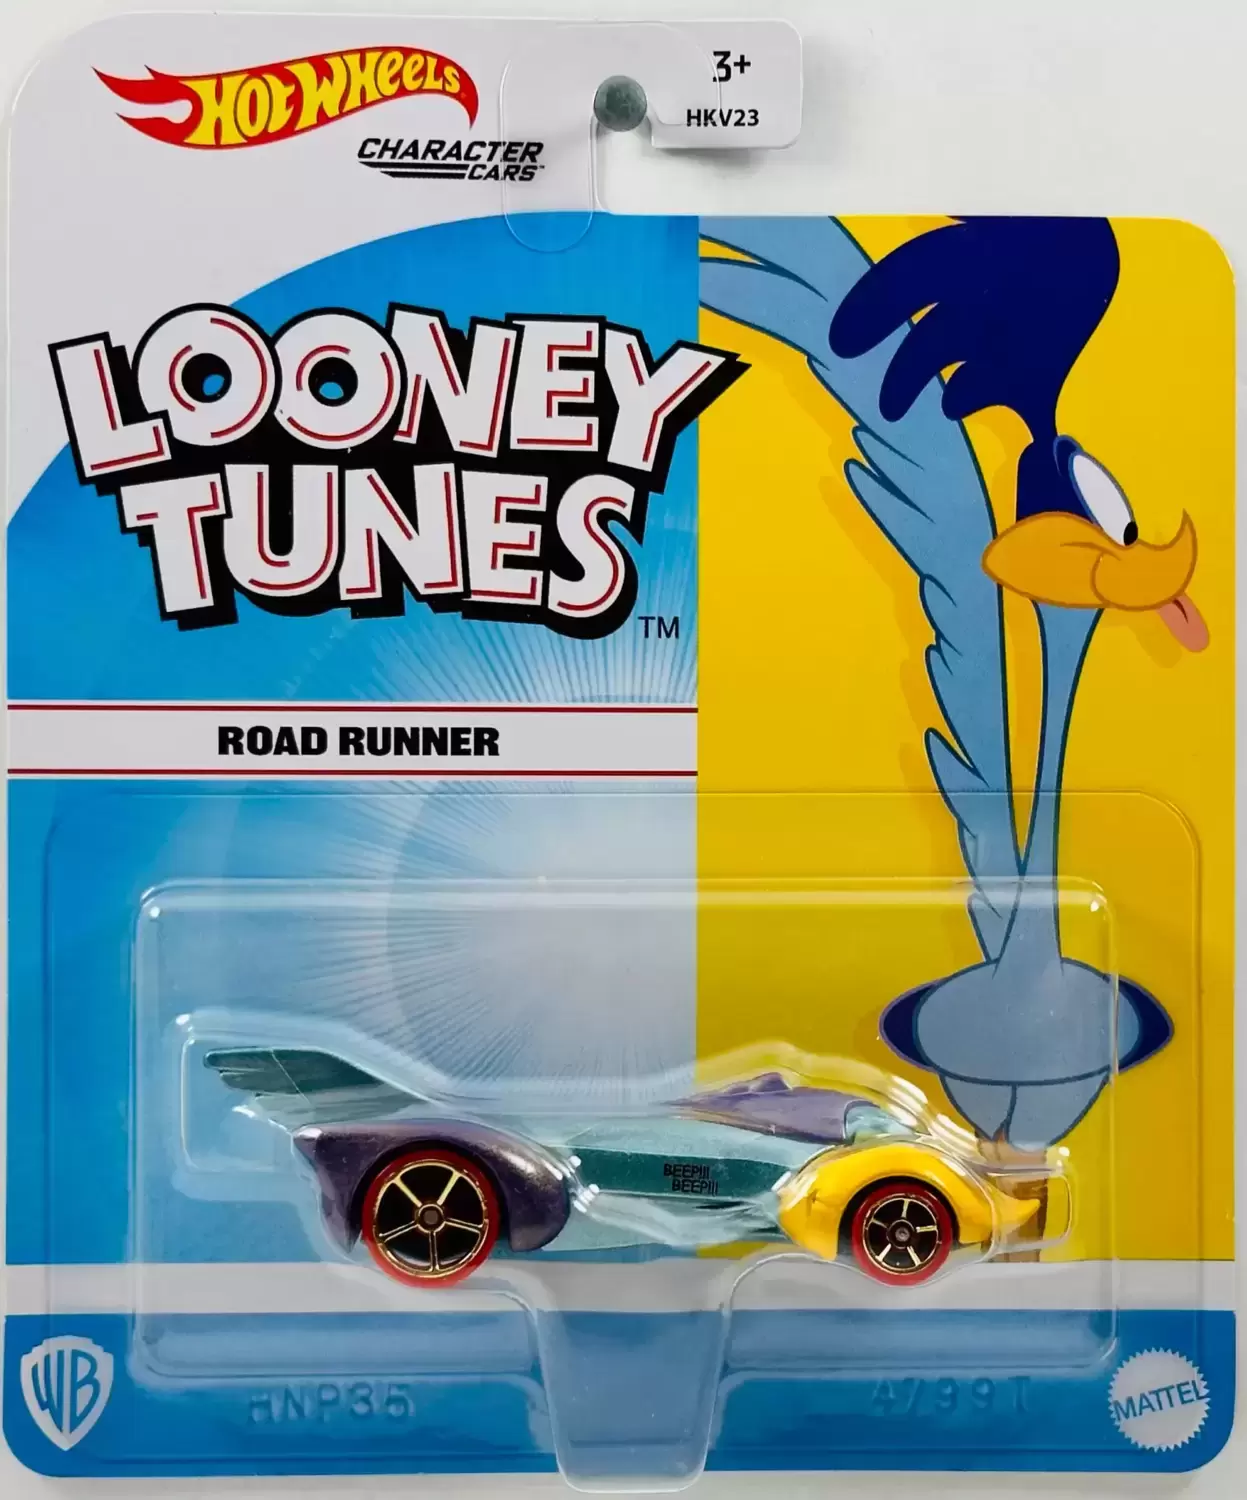 Looney Tunes Character Cars - Road Runner